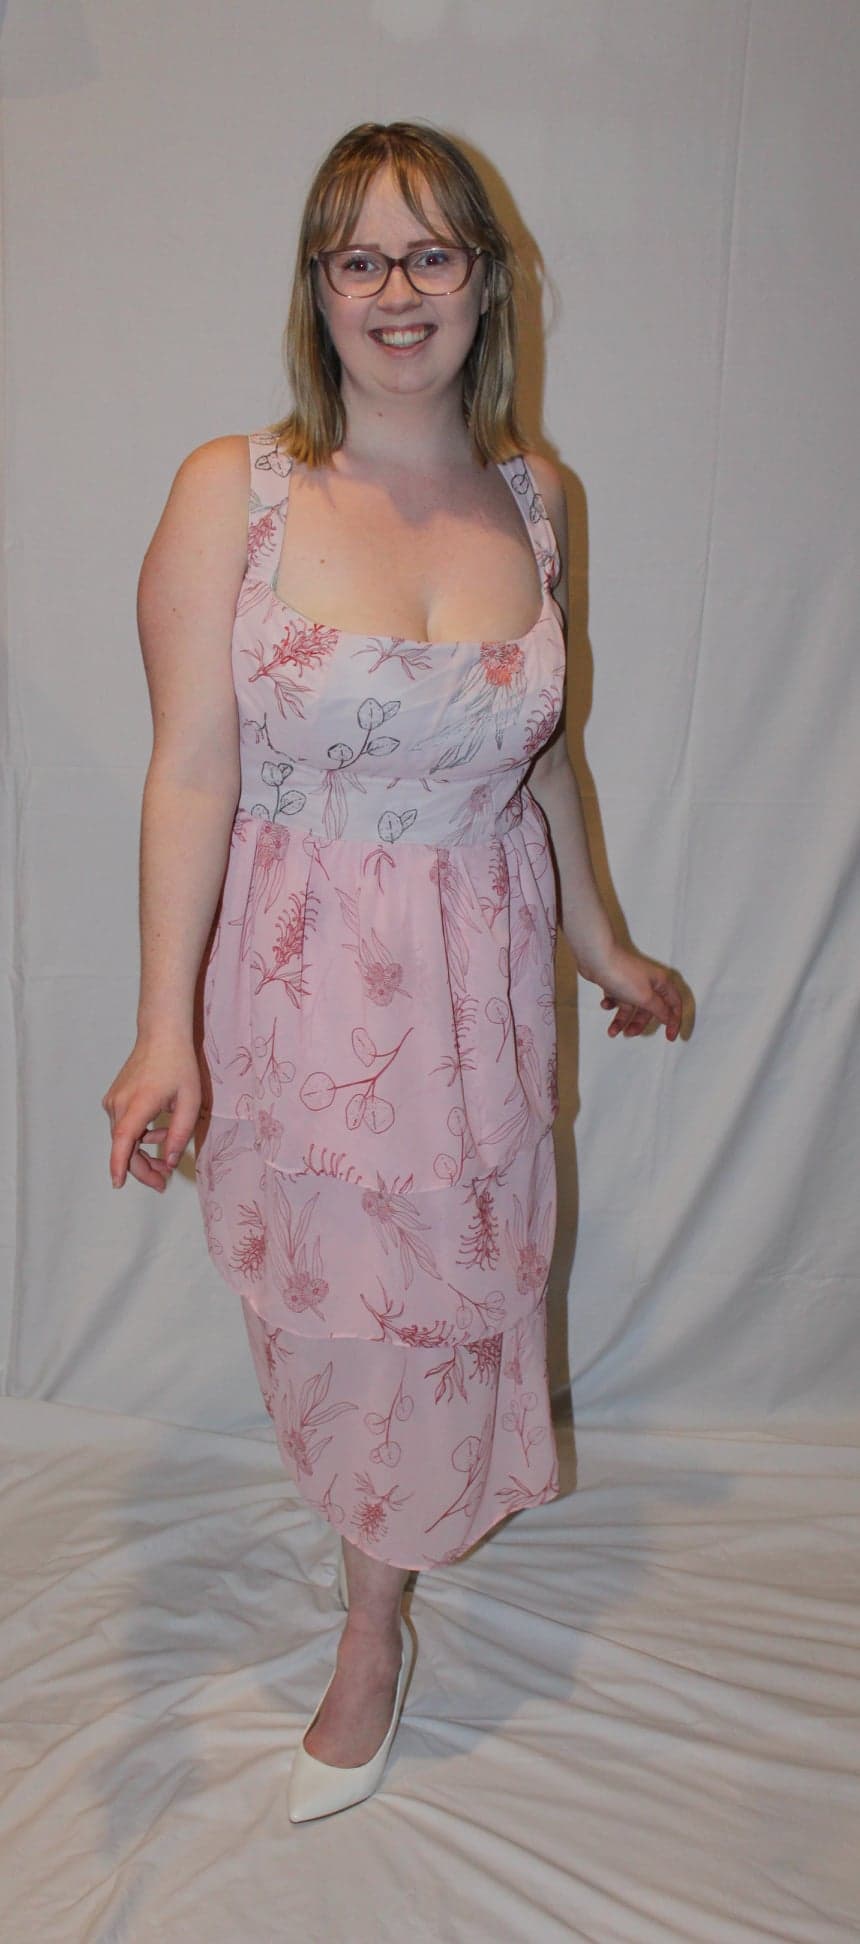 A smiling woman with glasses stands in a sleeveless pink floral dress paired with white shoes.